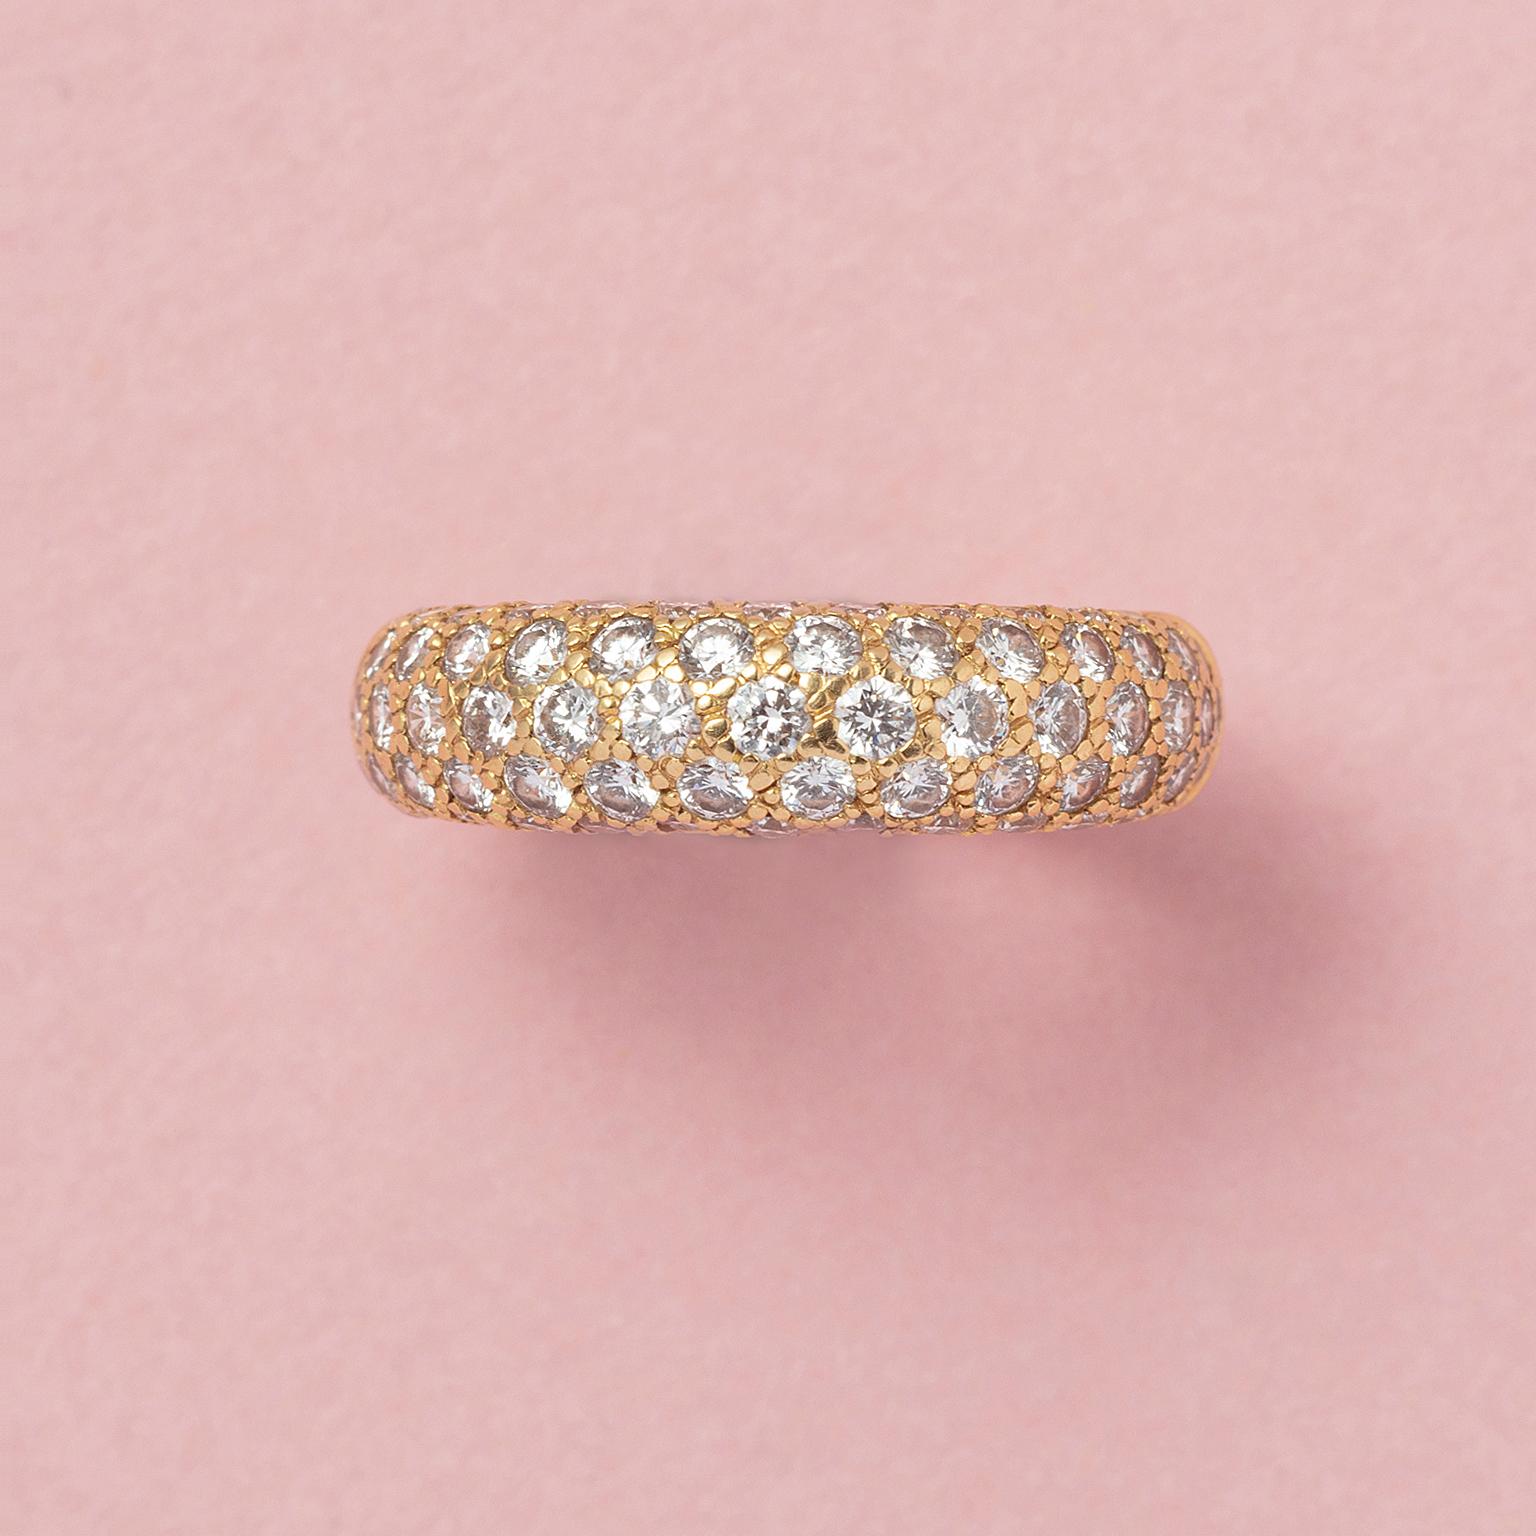 An 18 carat yellow gold band ring pavé set with 69 brilliant cut diamonds descending in size divided over five rows (app. 1.33 carat, D-F in color, VS clarity), signed and numbered: Cartier, 11150B model: Étincelle.

weight: 6.53 grams
size: 16.5 mm